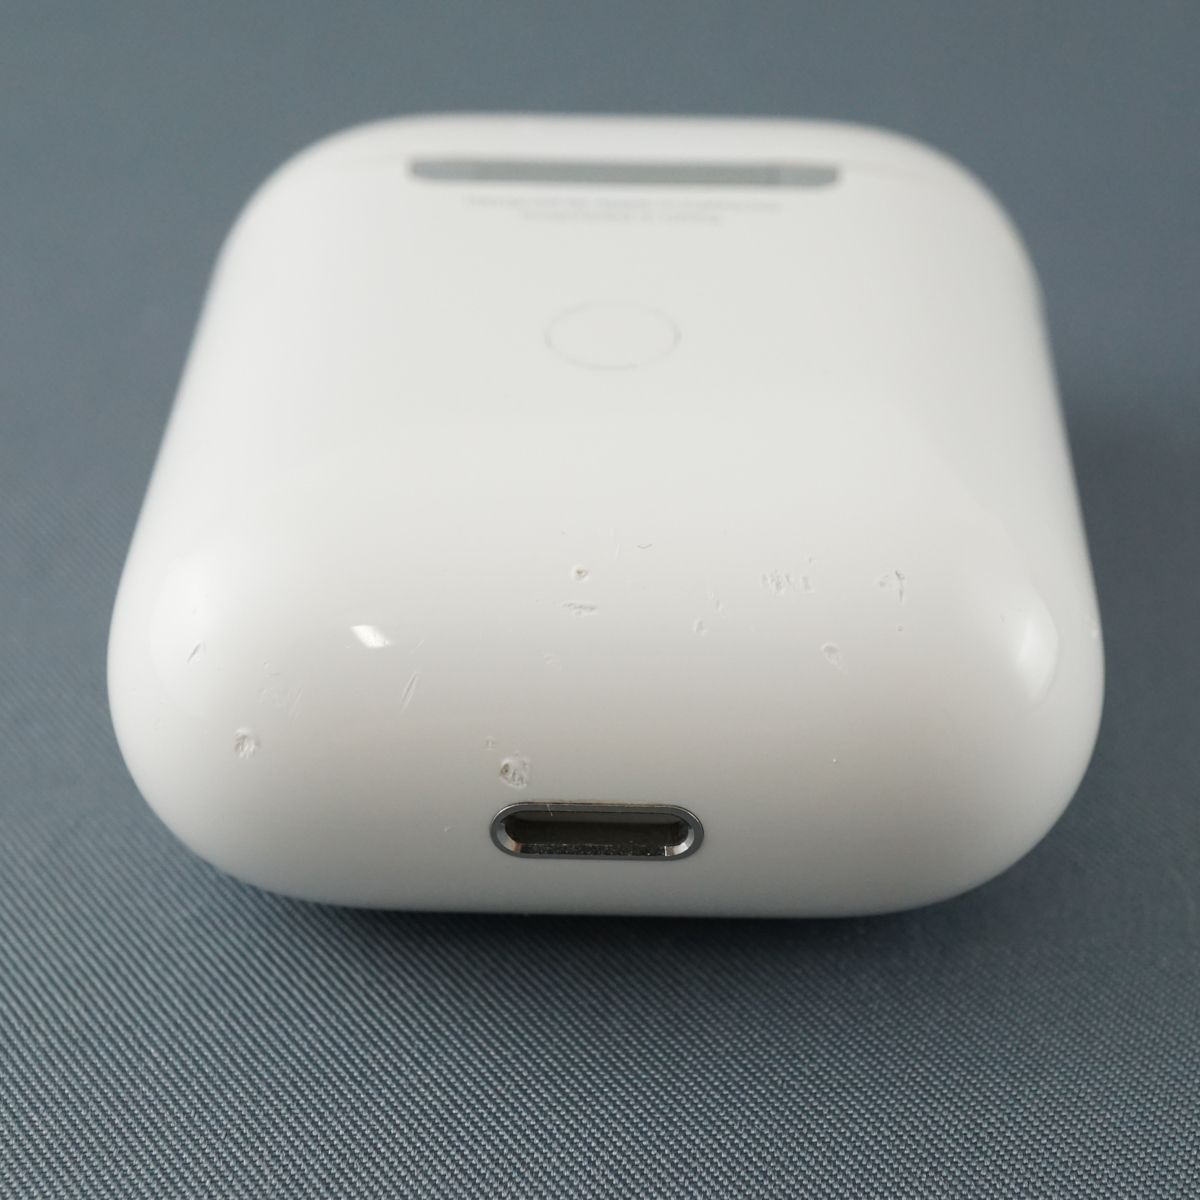 AirPods with Wireless Charging Case エアーポッズ 充電ケースのみ 